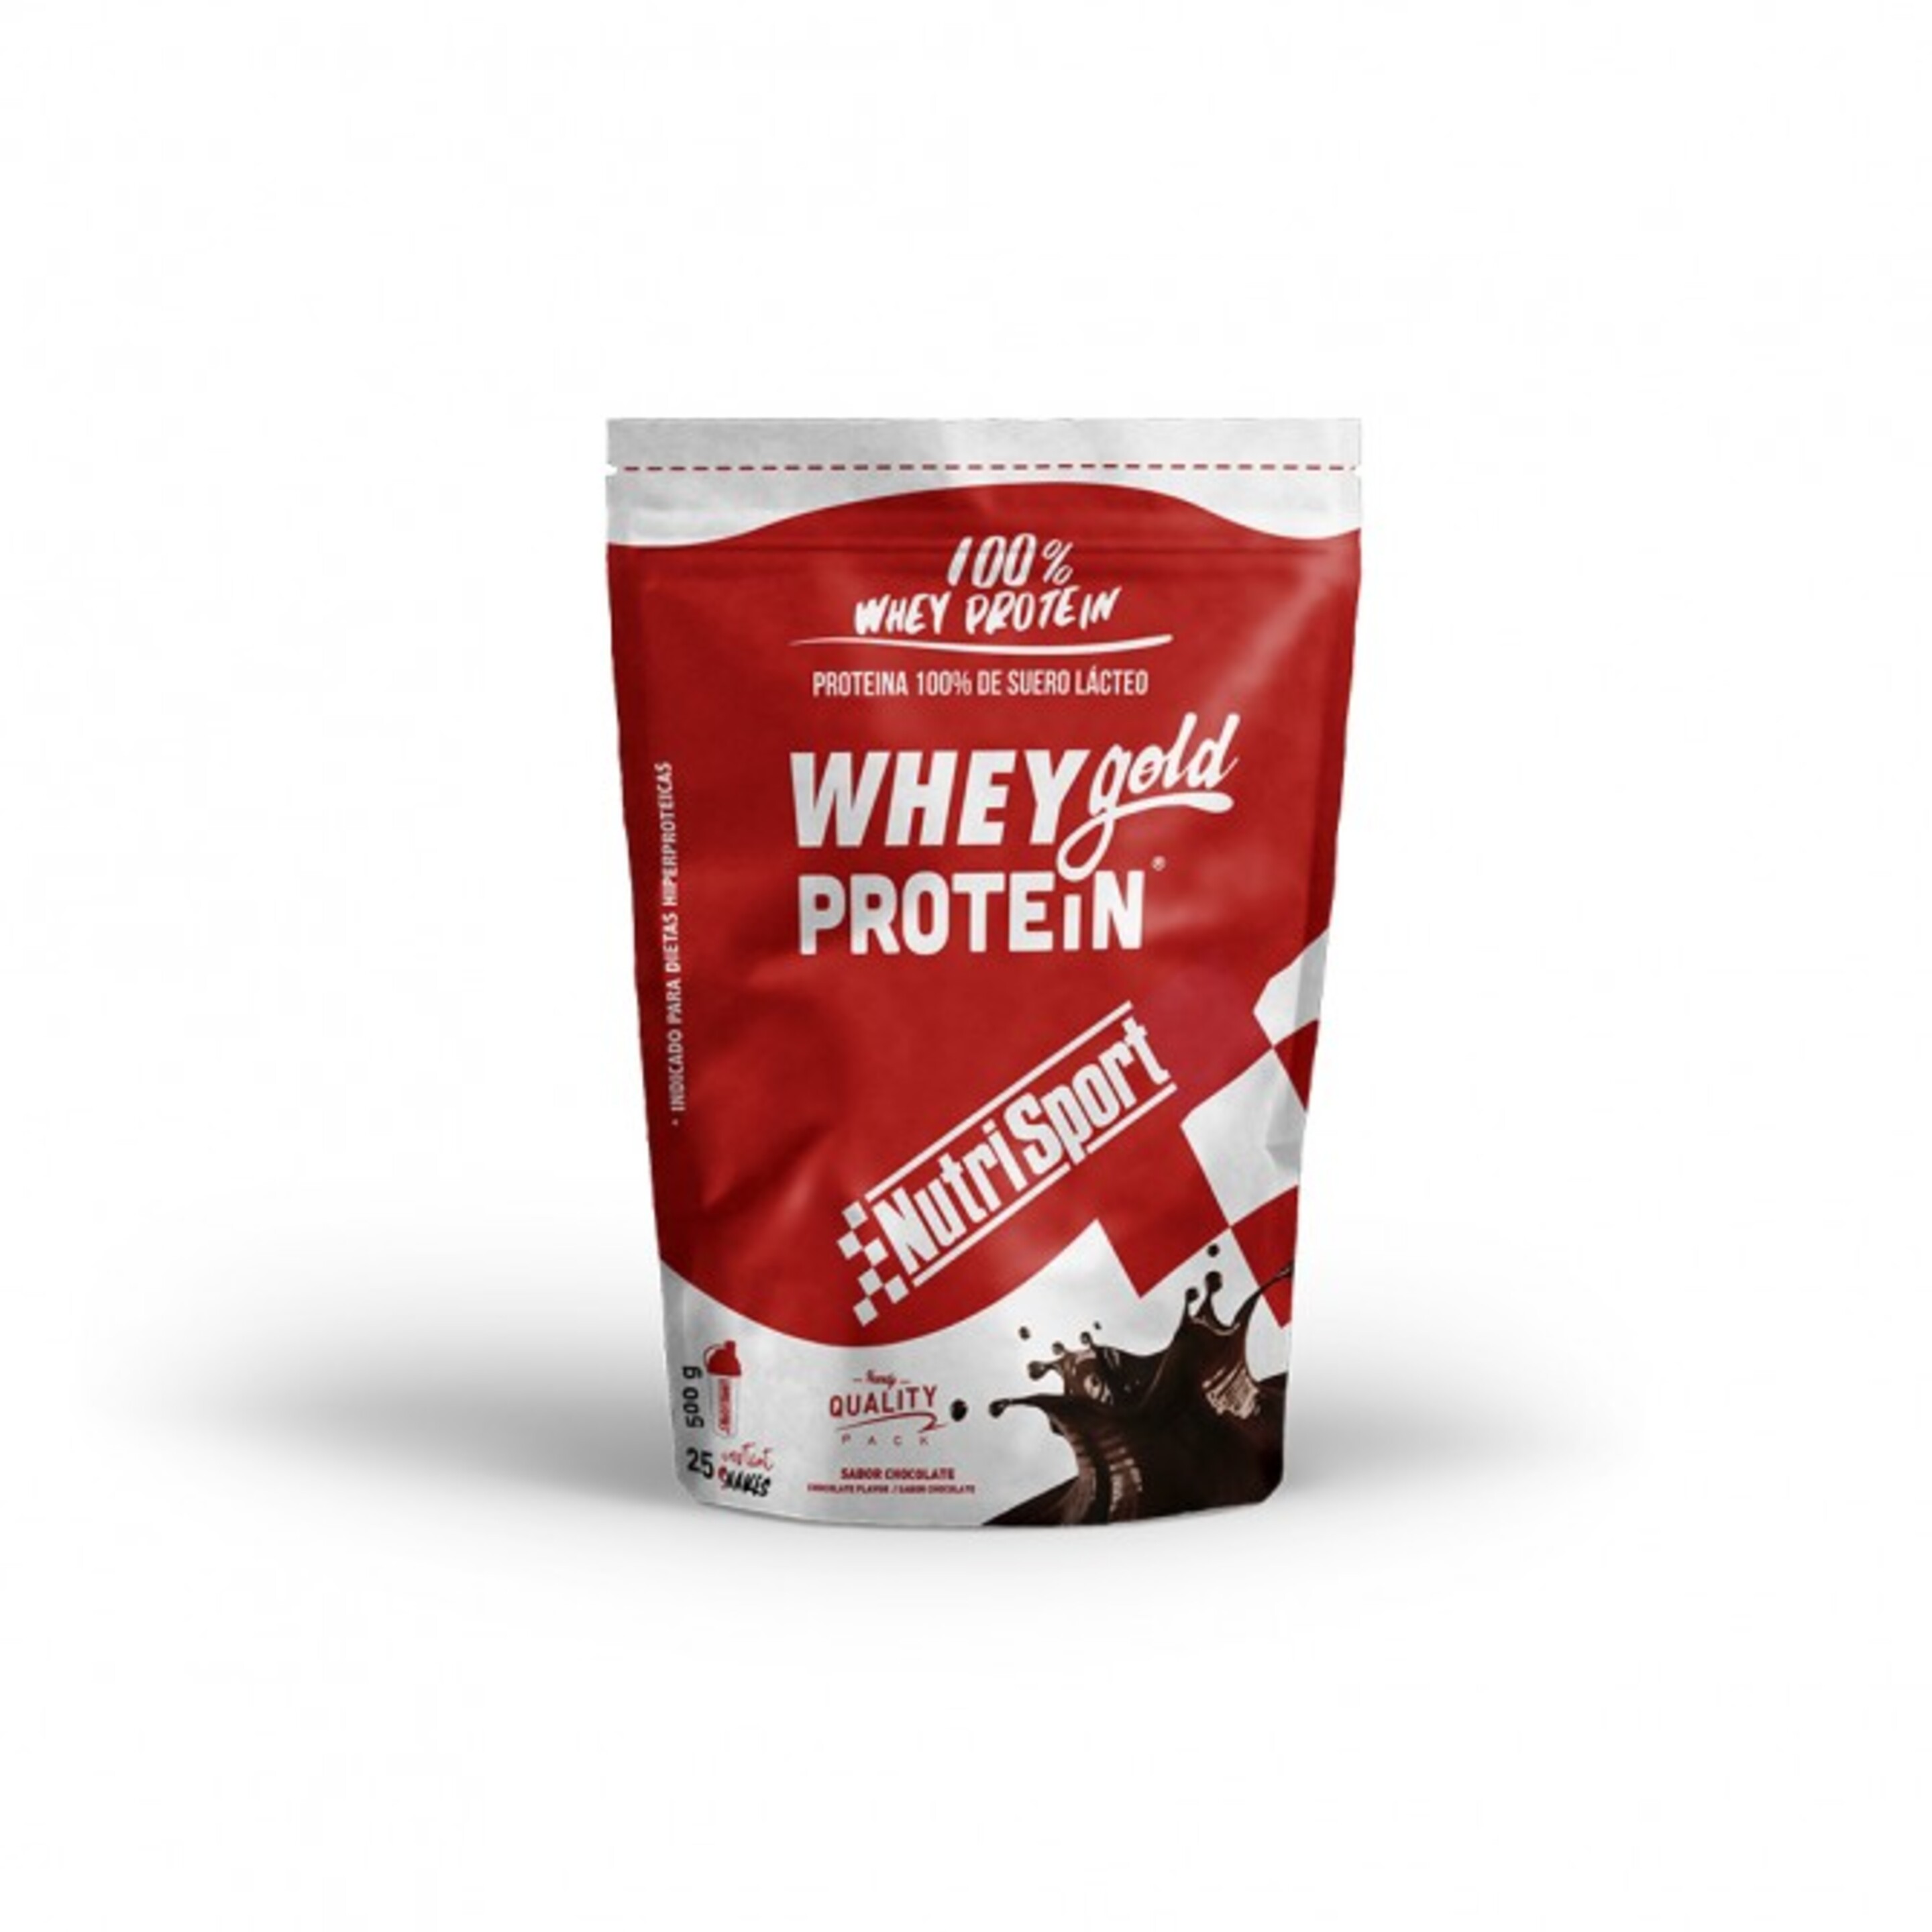 Whey Gold Protein 500g - Chocolate